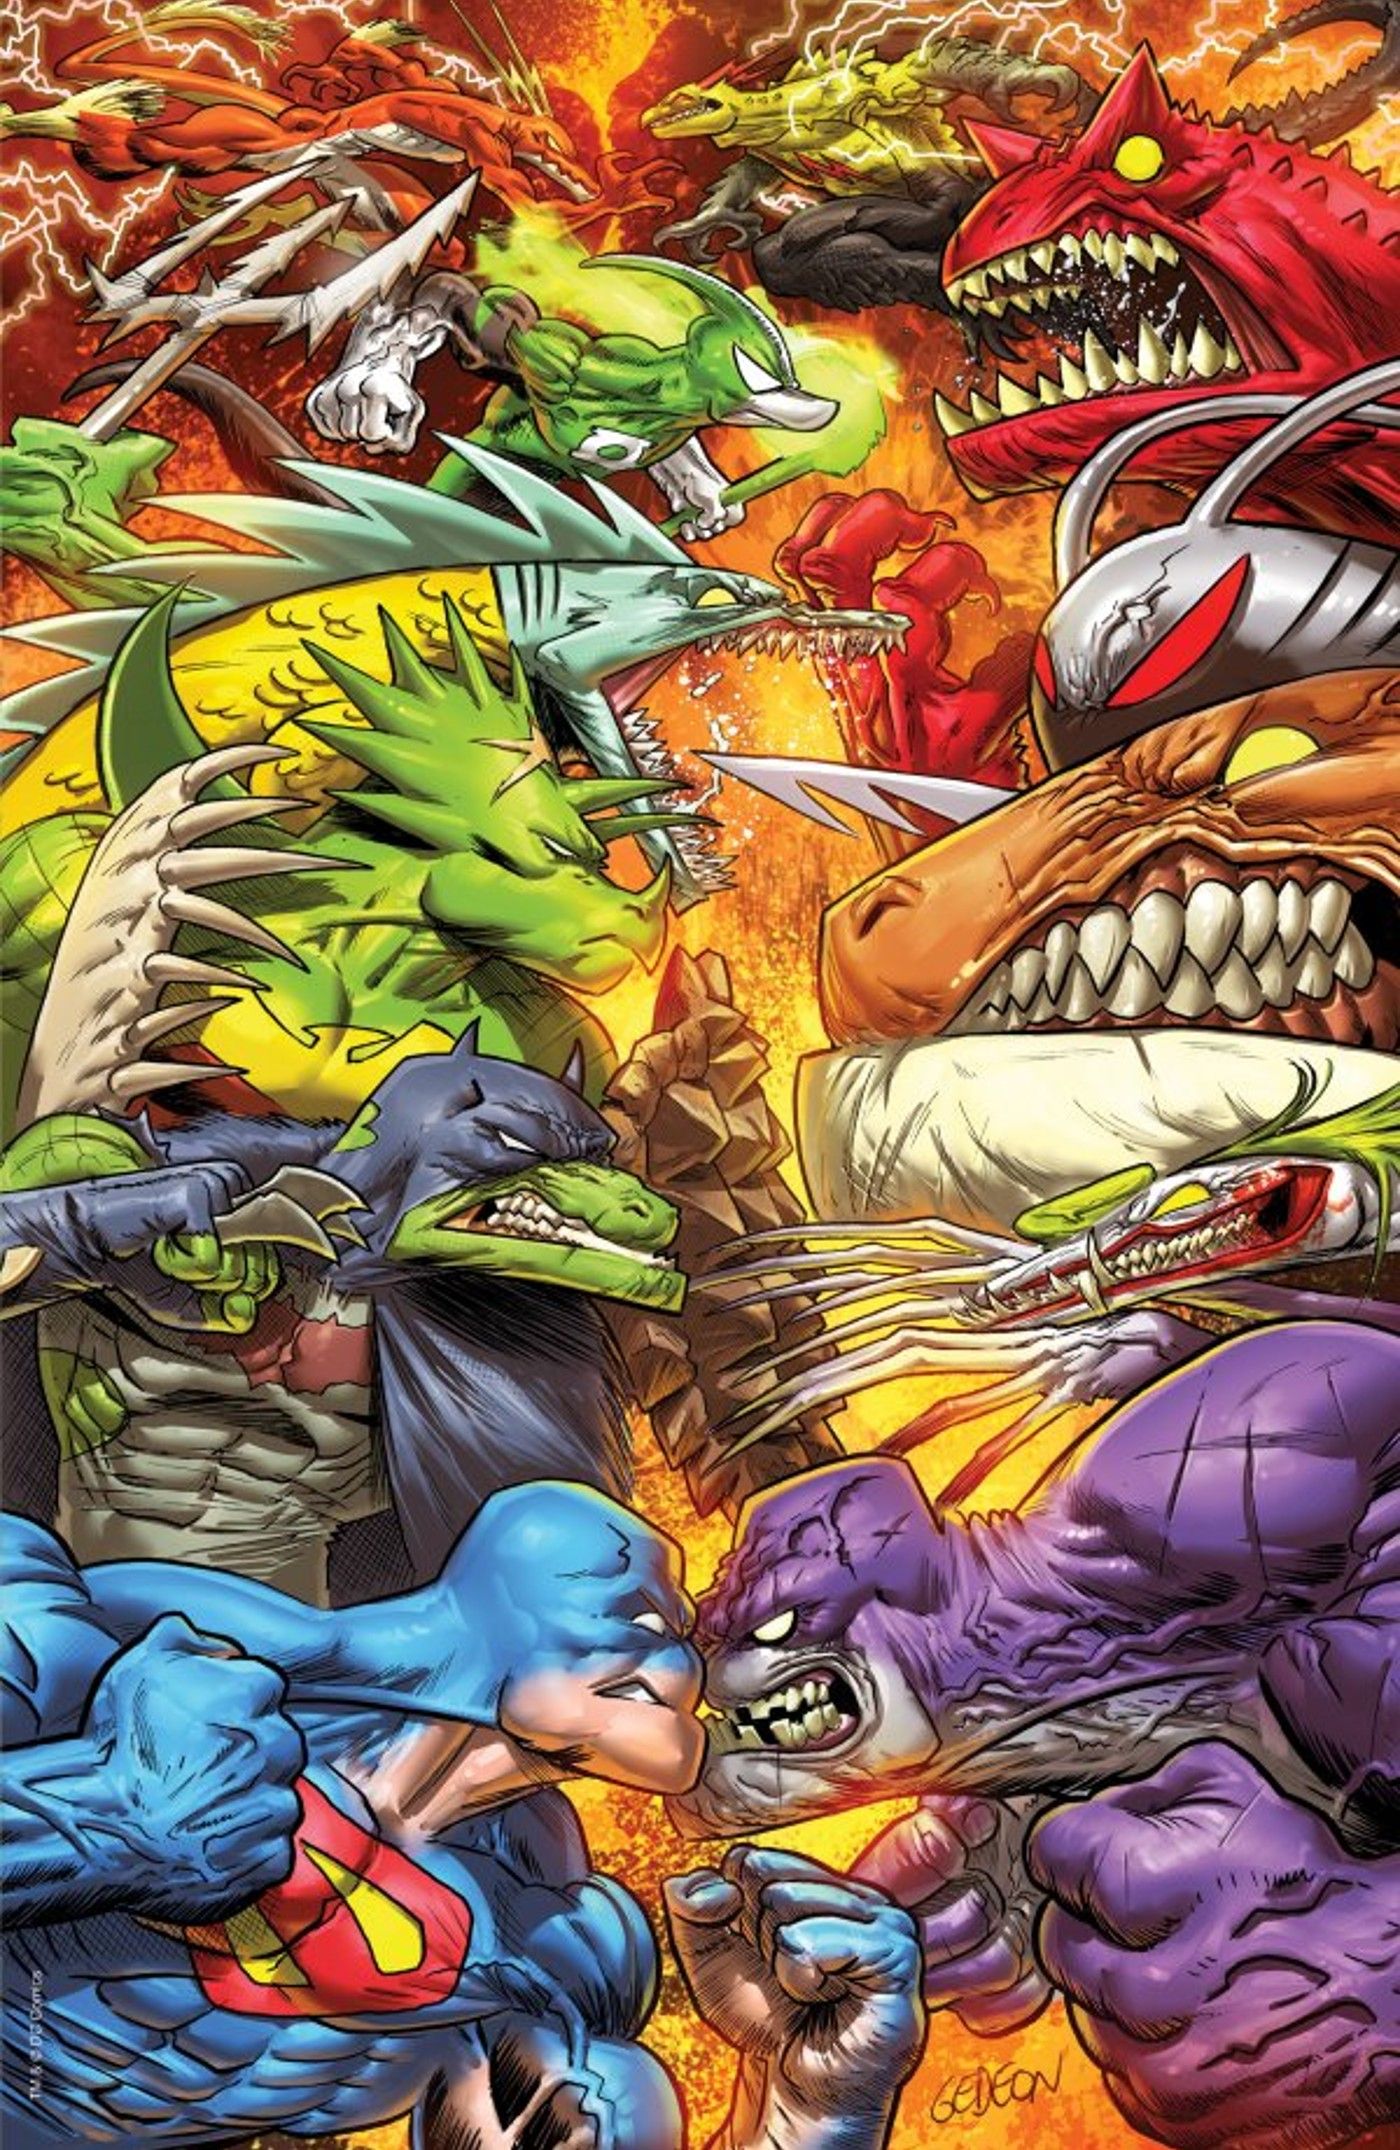 The cover of Jurassic League #1 featuring Green Lantern's dinosaur form